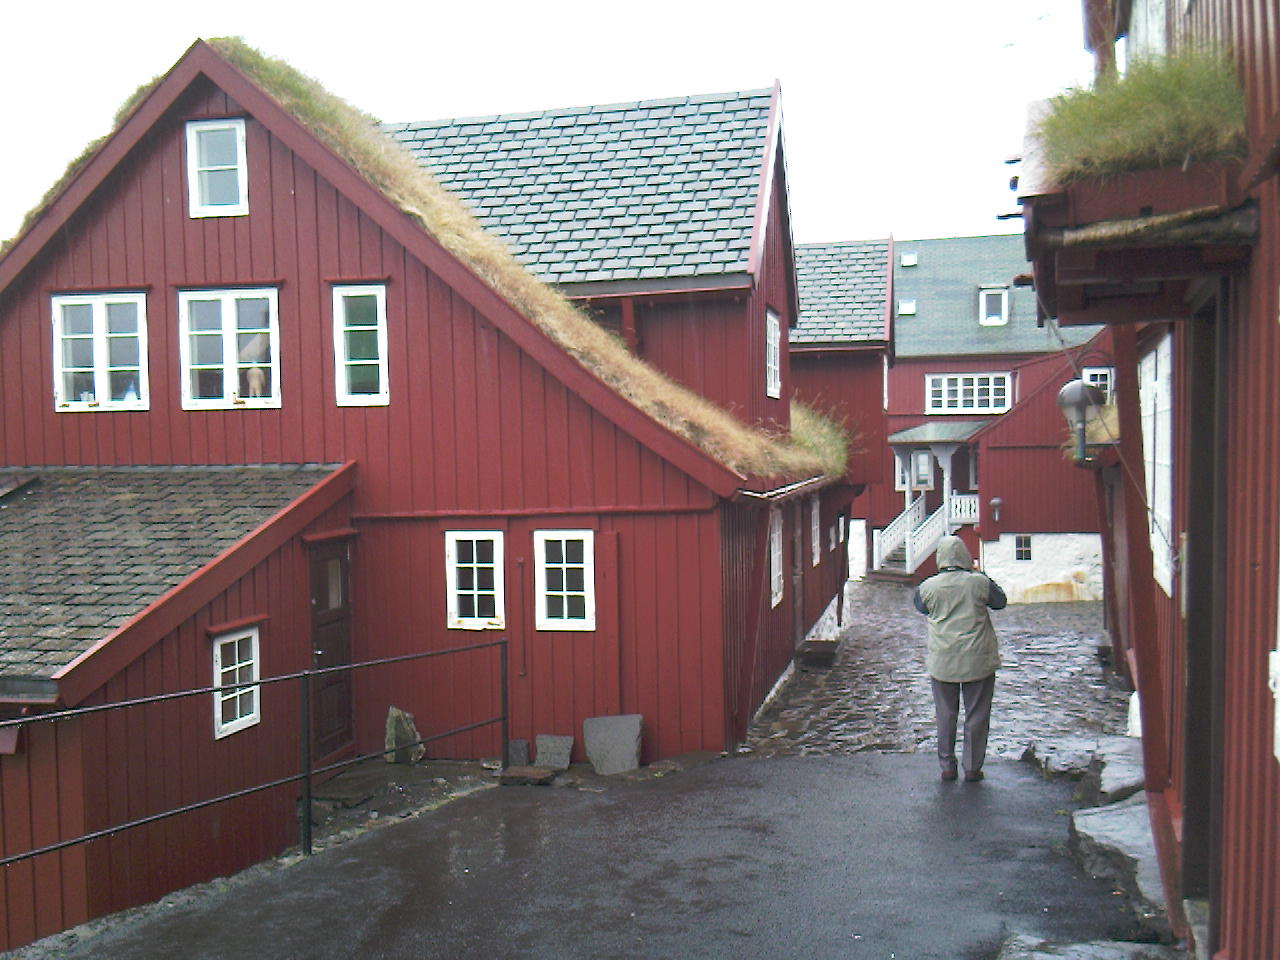 The old town, Trshavn, Froes